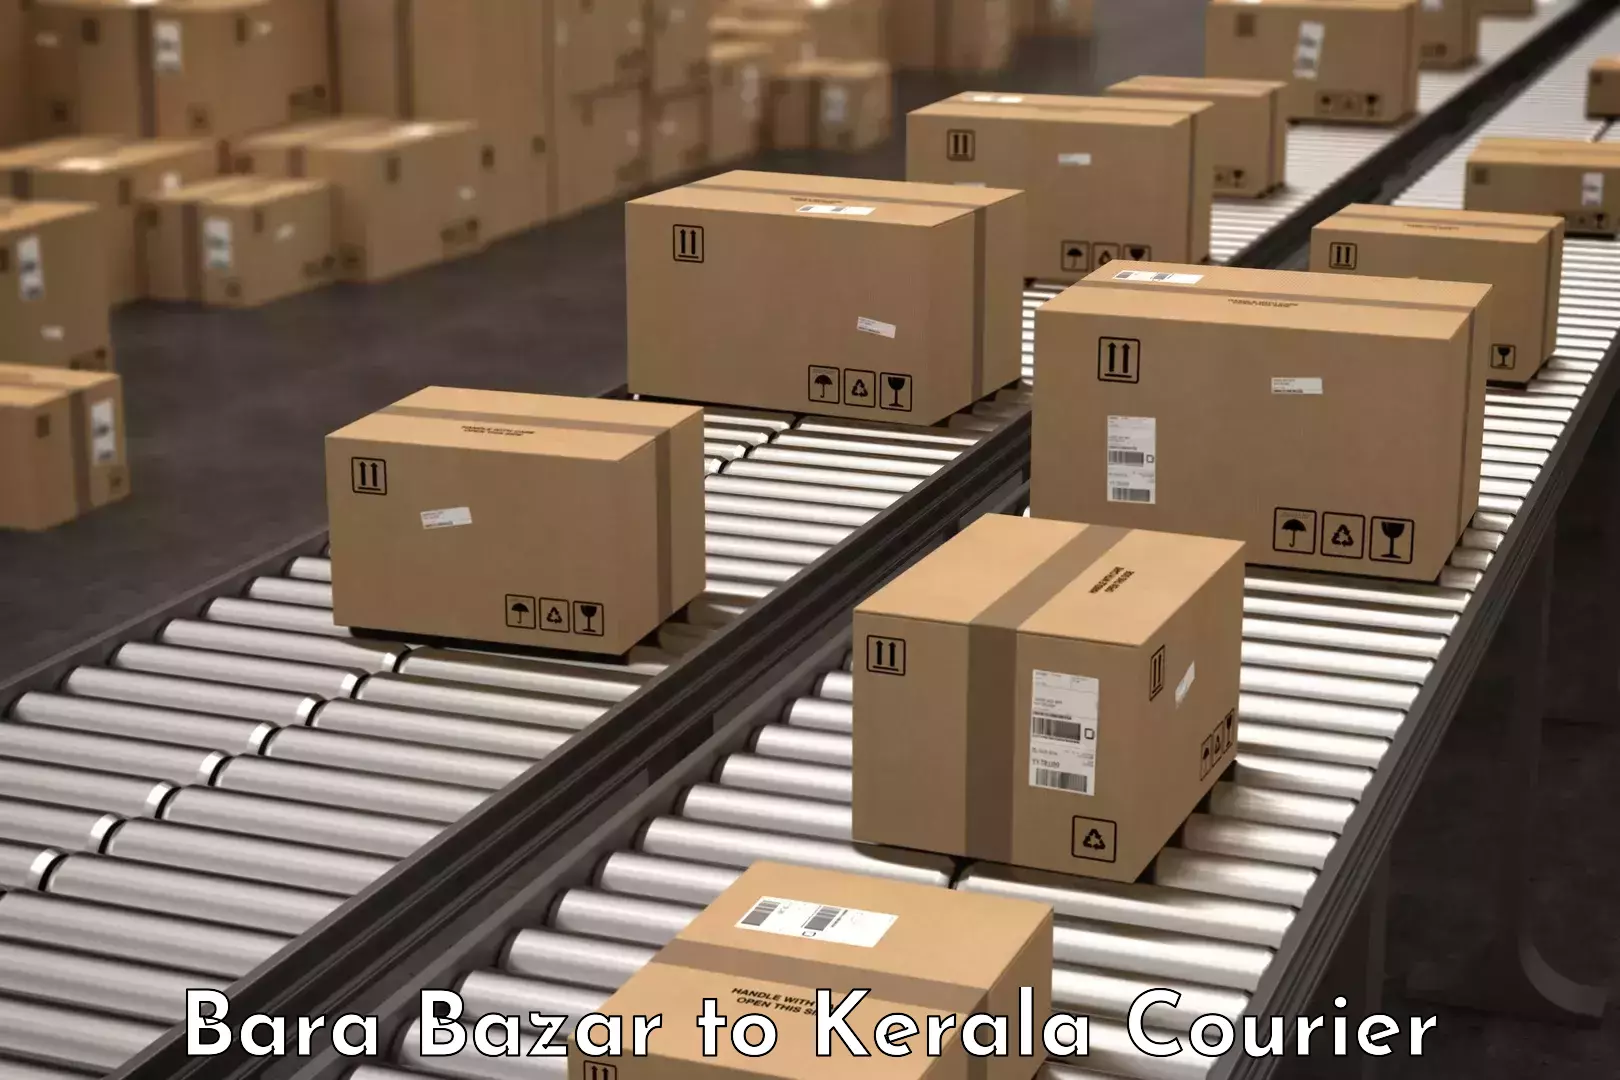 Furniture moving specialists Bara Bazar to Kerala